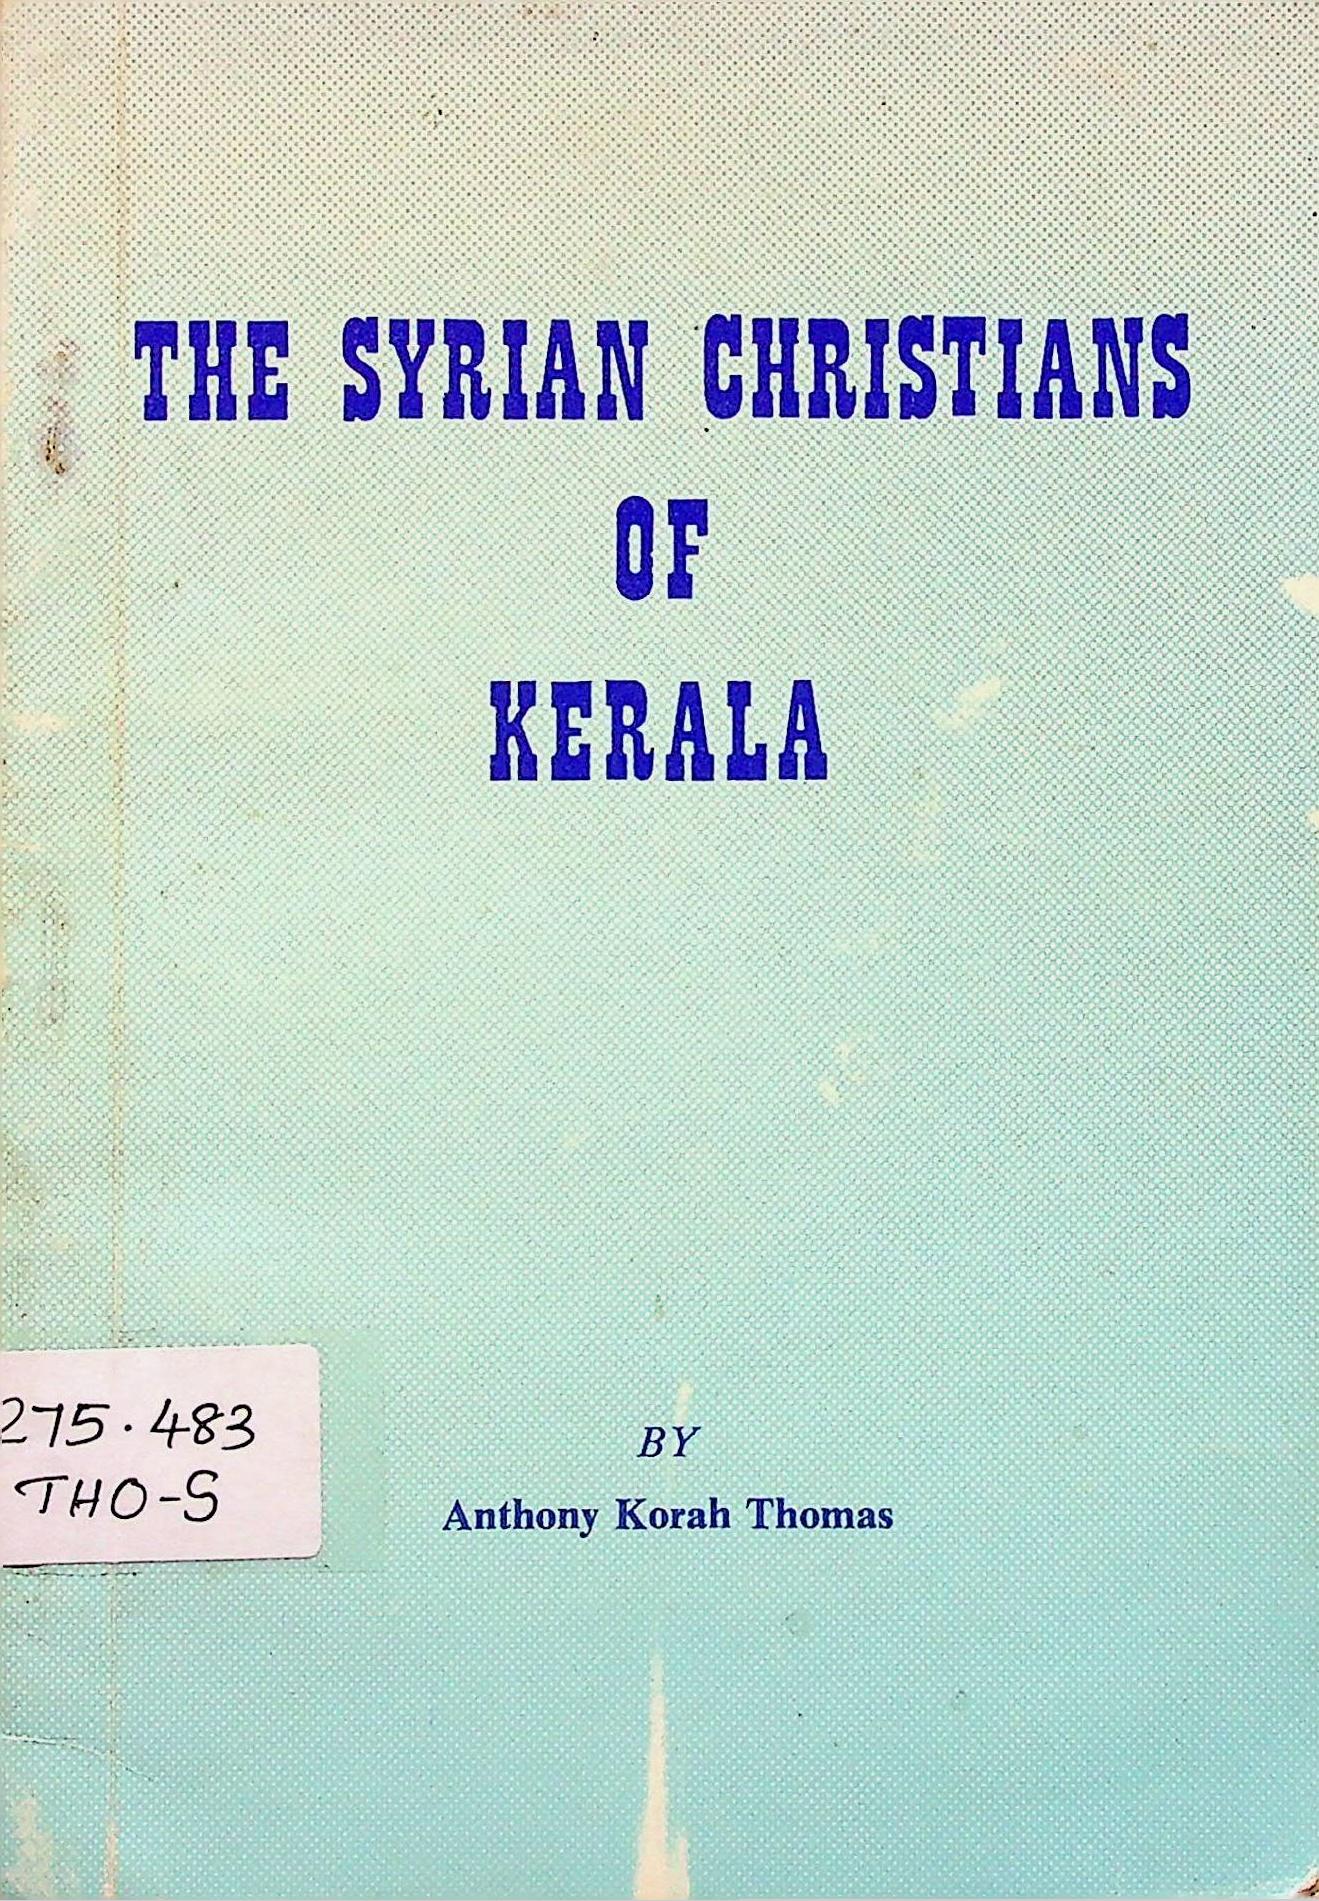 The Syrian Christians of Kerala